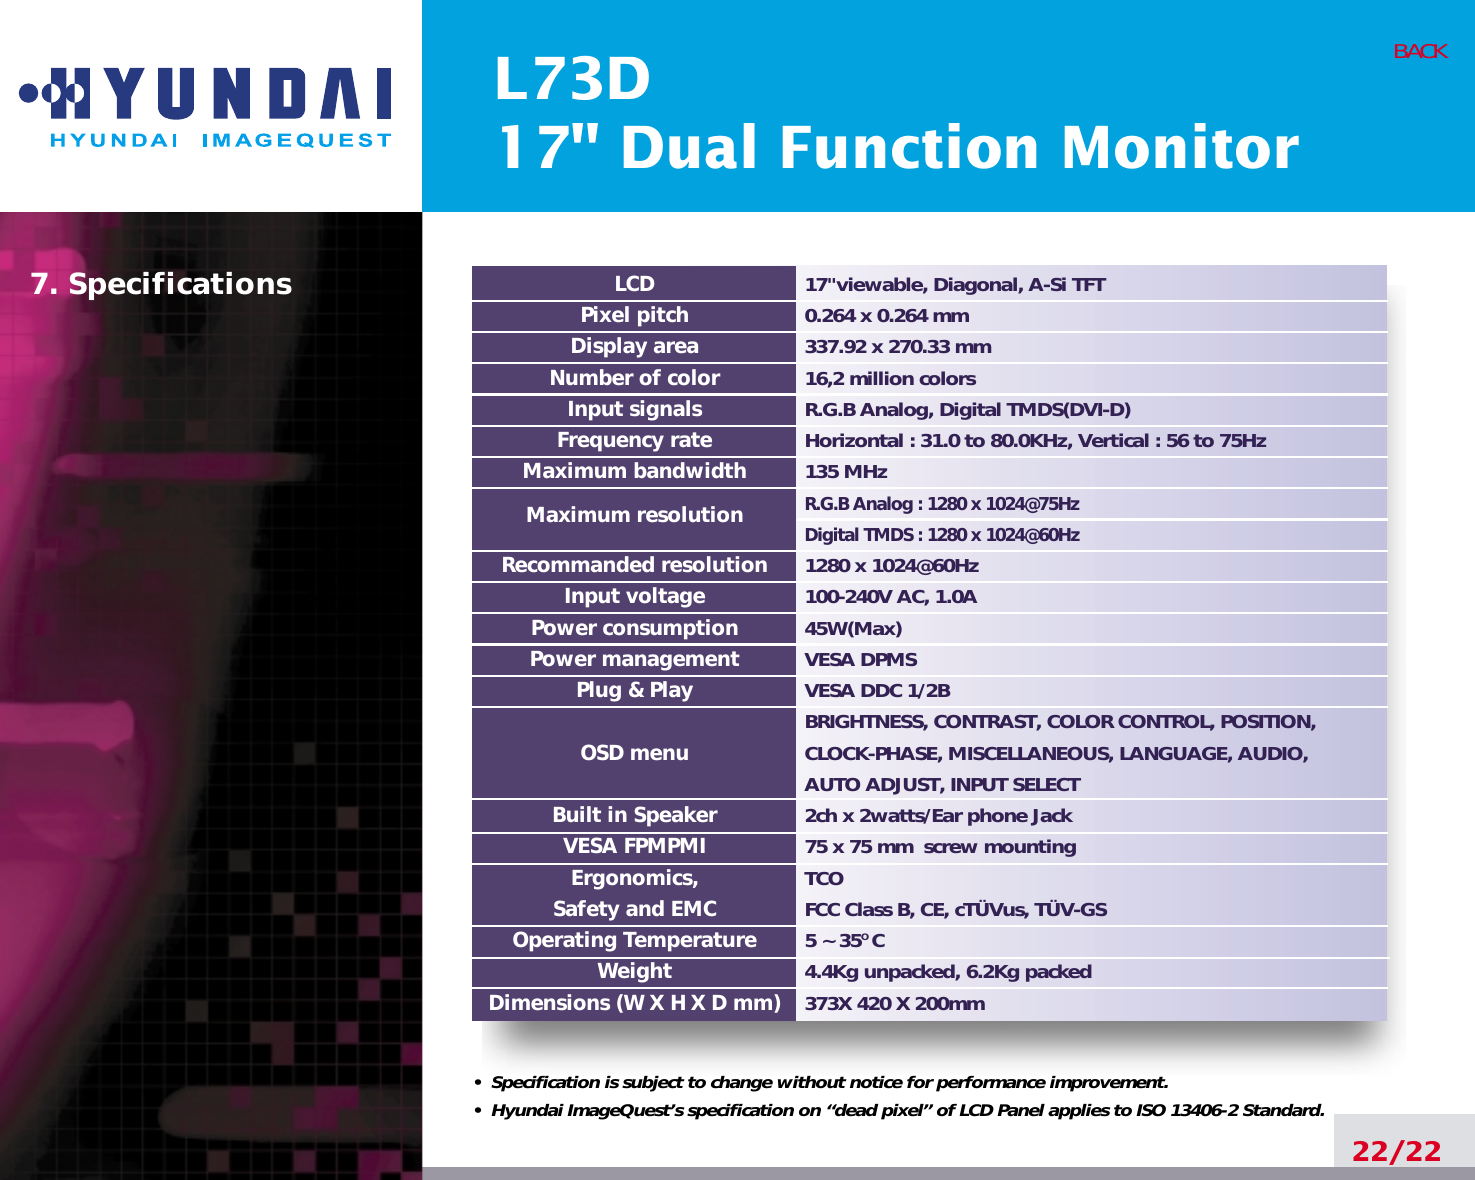 L73D17&quot; Dual Function Monitor22/22BACK17&quot;viewable, Diagonal, A-Si TFT0.264 x 0.264 mm337.92 x 270.33 mm16,2 million colorsR.G.B Analog, Digital TMDS(DVI-D)Horizontal : 31.0 to 80.0KHz, Vertical : 56 to 75Hz135 MHzR.G.B Analog : 1280 x 1024@75Hz  Digital TMDS : 1280 x 1024@60Hz1280 x 1024@60Hz100-240V AC, 1.0A45W(Max)VESA DPMSVESA DDC 1/2BBRIGHTNESS, CONTRAST, COLOR CONTROL, POSITION, CLOCK-PHASE, MISCELLANEOUS, LANGUAGE, AUDIO,AUTO ADJUST, INPUT SELECT2ch x 2watts/Ear phone Jack75 x 75 mm  screw mountingTCO FCC Class B, CE, cTÜVus, TÜV-GS5 ~ 35O C4.4Kg unpacked, 6.2Kg packed373X 420 X 200mmLCDPixel pitchDisplay areaNumber of colorInput signalsFrequency rateMaximum bandwidthMaximum resolutionRecommanded resolutionInput voltagePower consumptionPower managementPlug &amp; PlayOSD menuBuilt in SpeakerVESA FPMPMIErgonomics,Safety and EMCOperating TemperatureWeightDimensions (W X H X D mm)7. Specifications•  Specification is subject to change without notice for performance improvement.•  Hyundai ImageQuest’s specification on “dead pixel” of LCD Panel applies to ISO 13406-2 Standard.